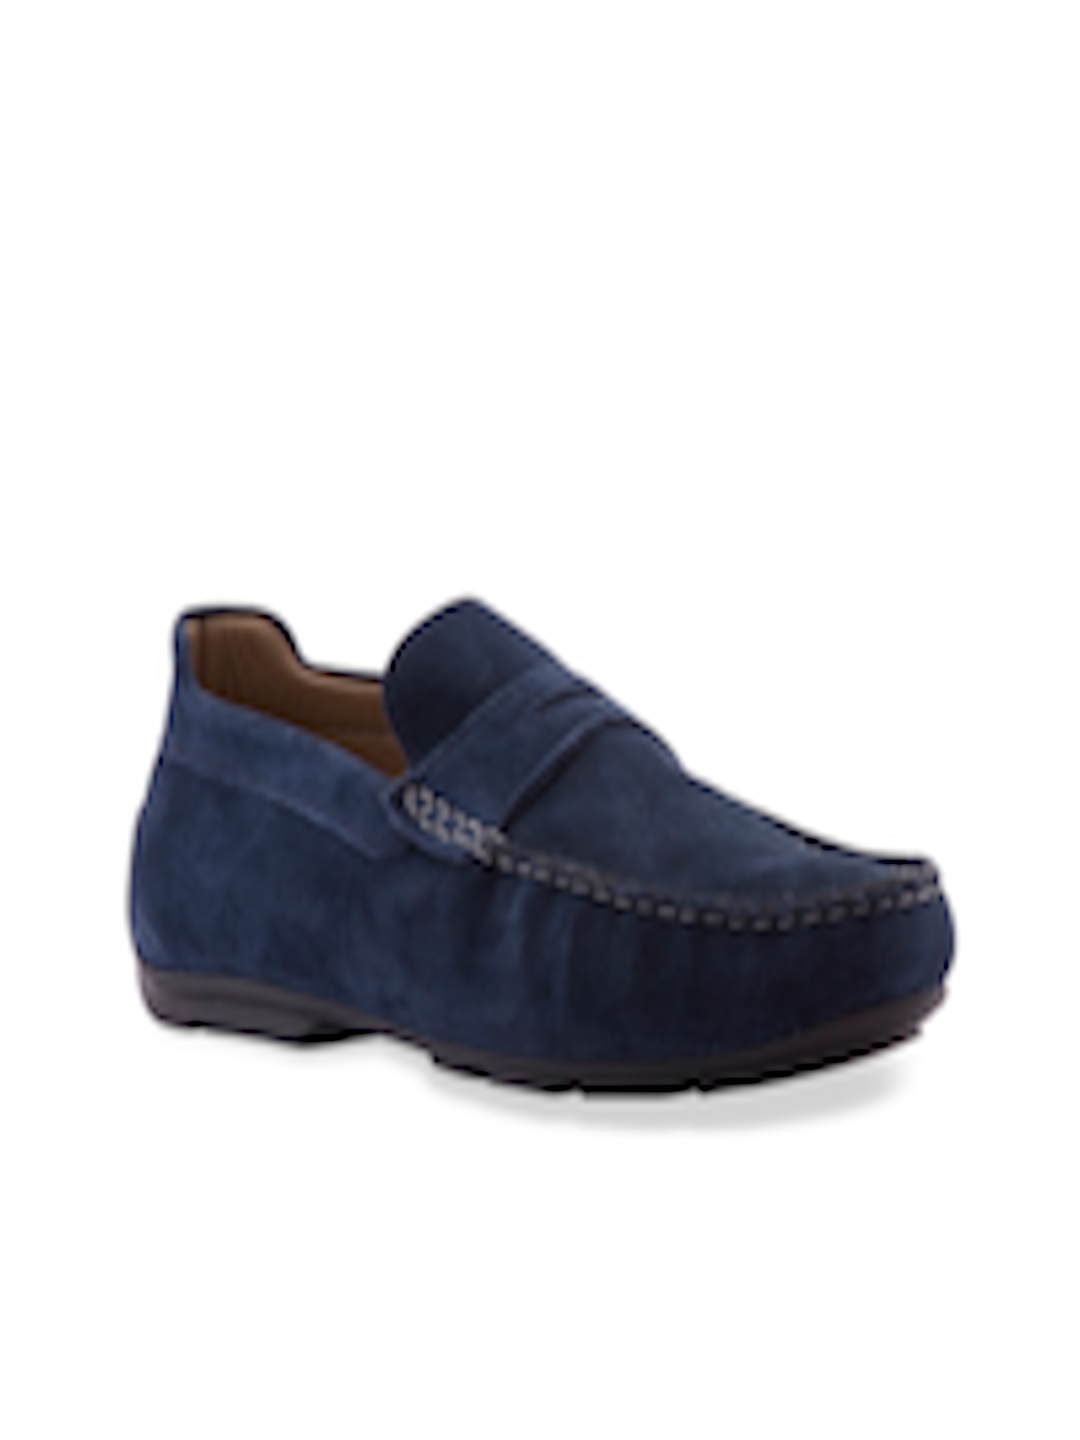 Buy VAPH Men Navy Blue Loafers - Casual Shoes for Men 7118084 | Myntra